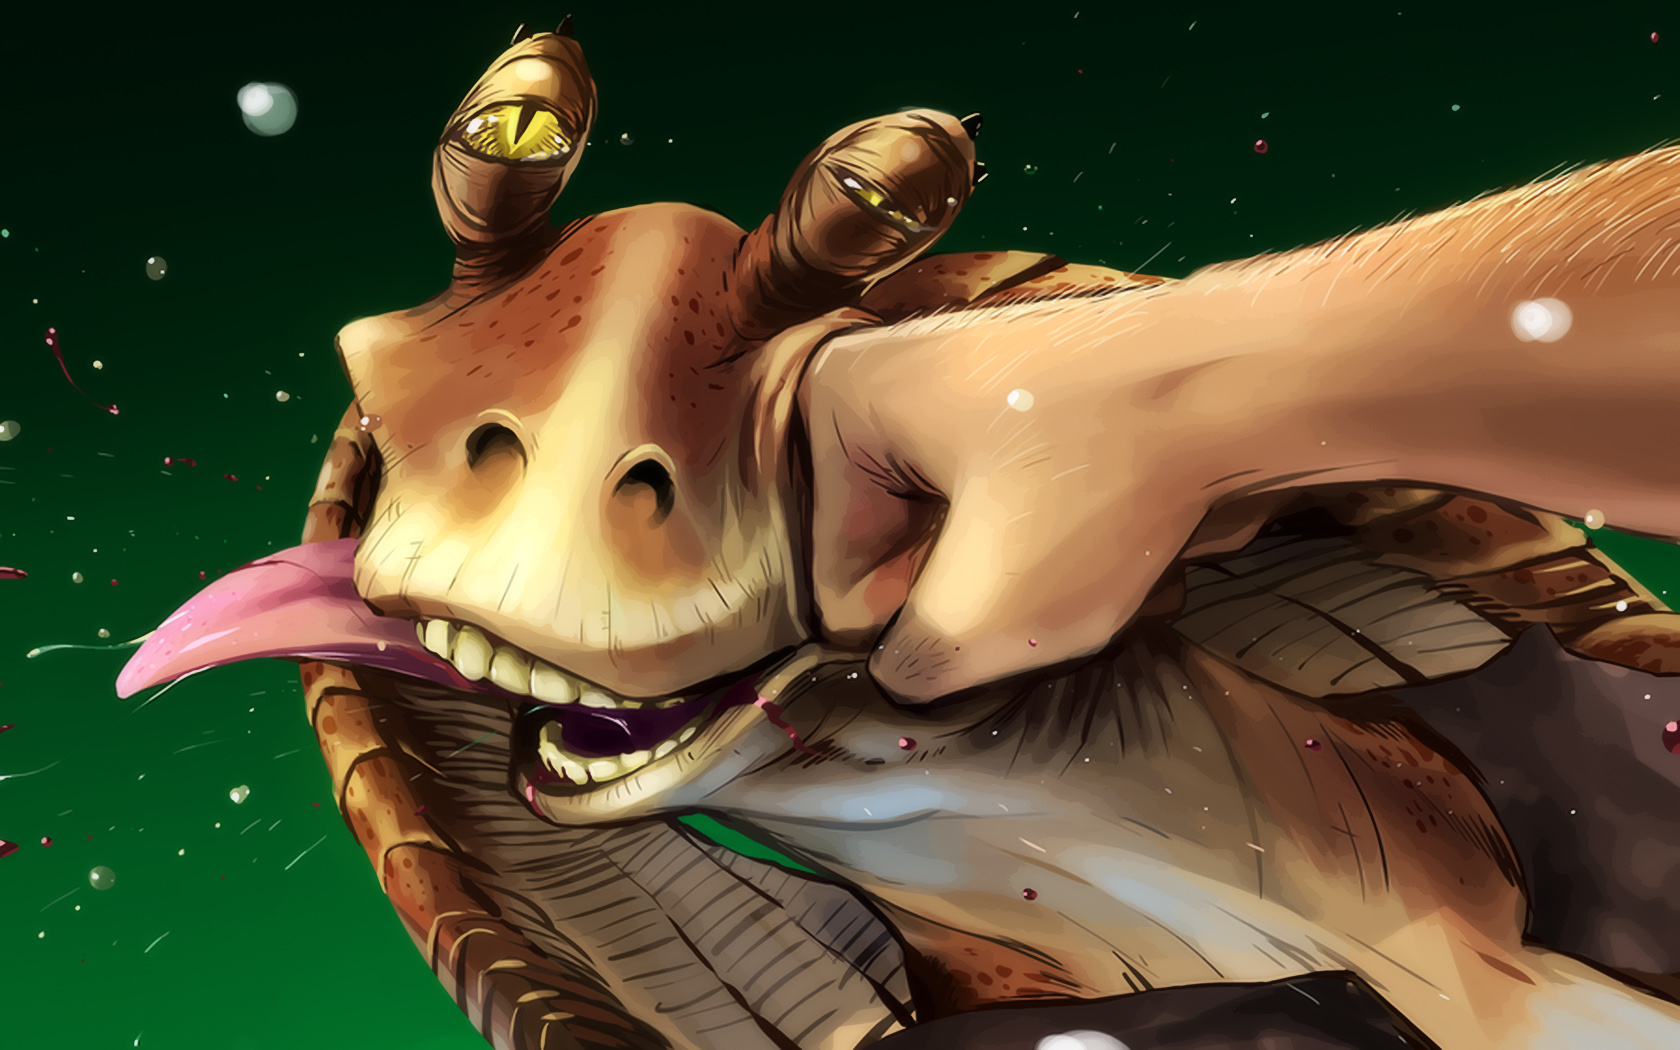 Here’s Some Wallpaper Of Jar Binks Getting Walloped In The Face.